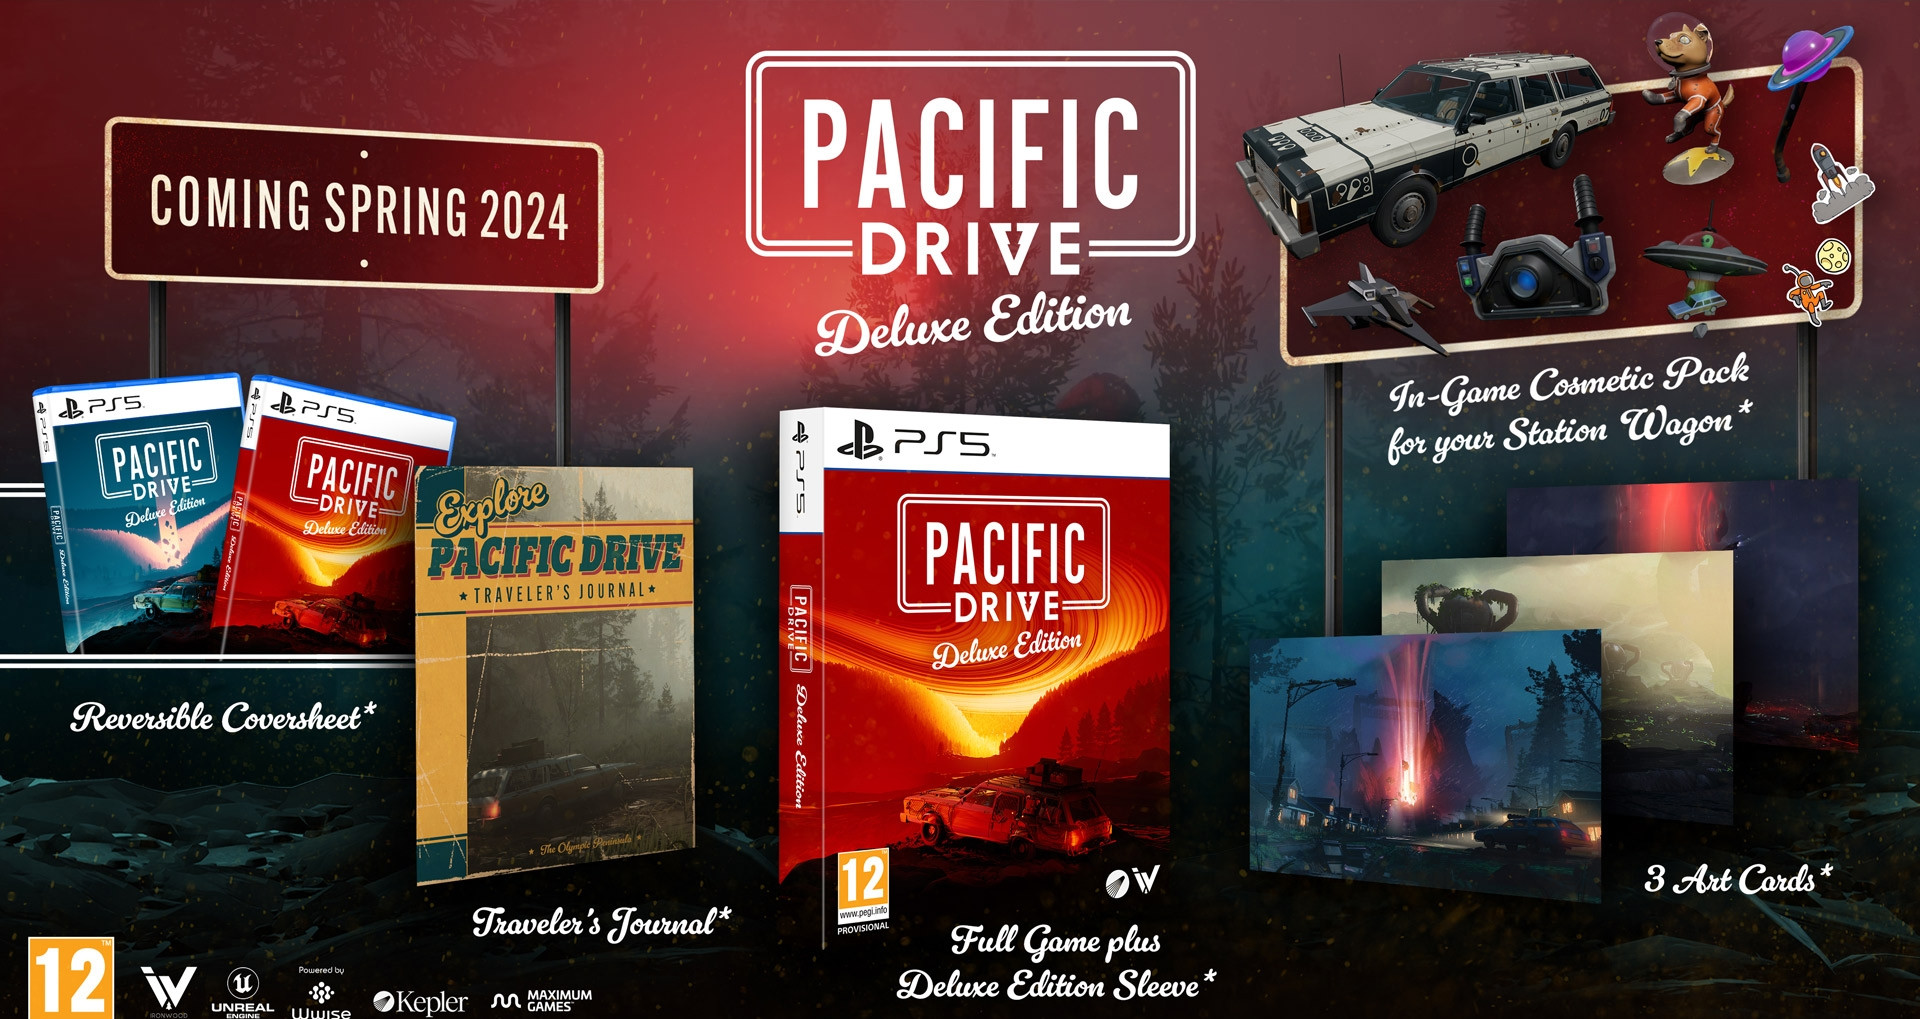 Pacific Drive - Deluxe Edition (PS5), Maximum Games